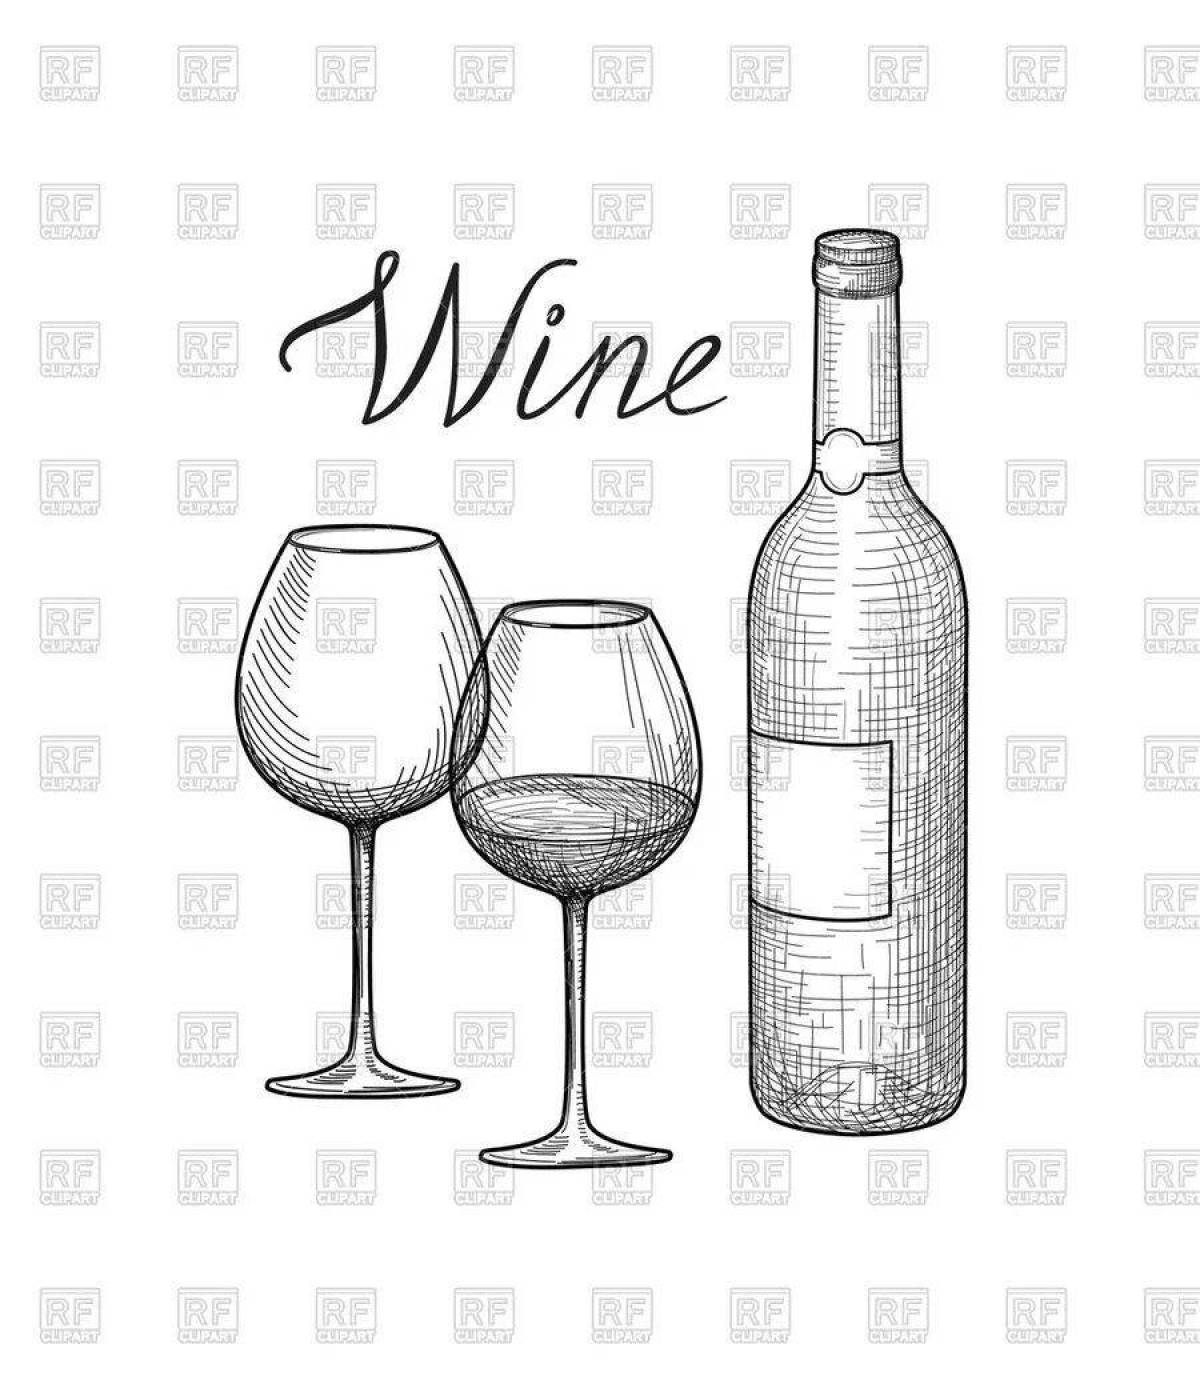 Glowing wine bottle coloring page